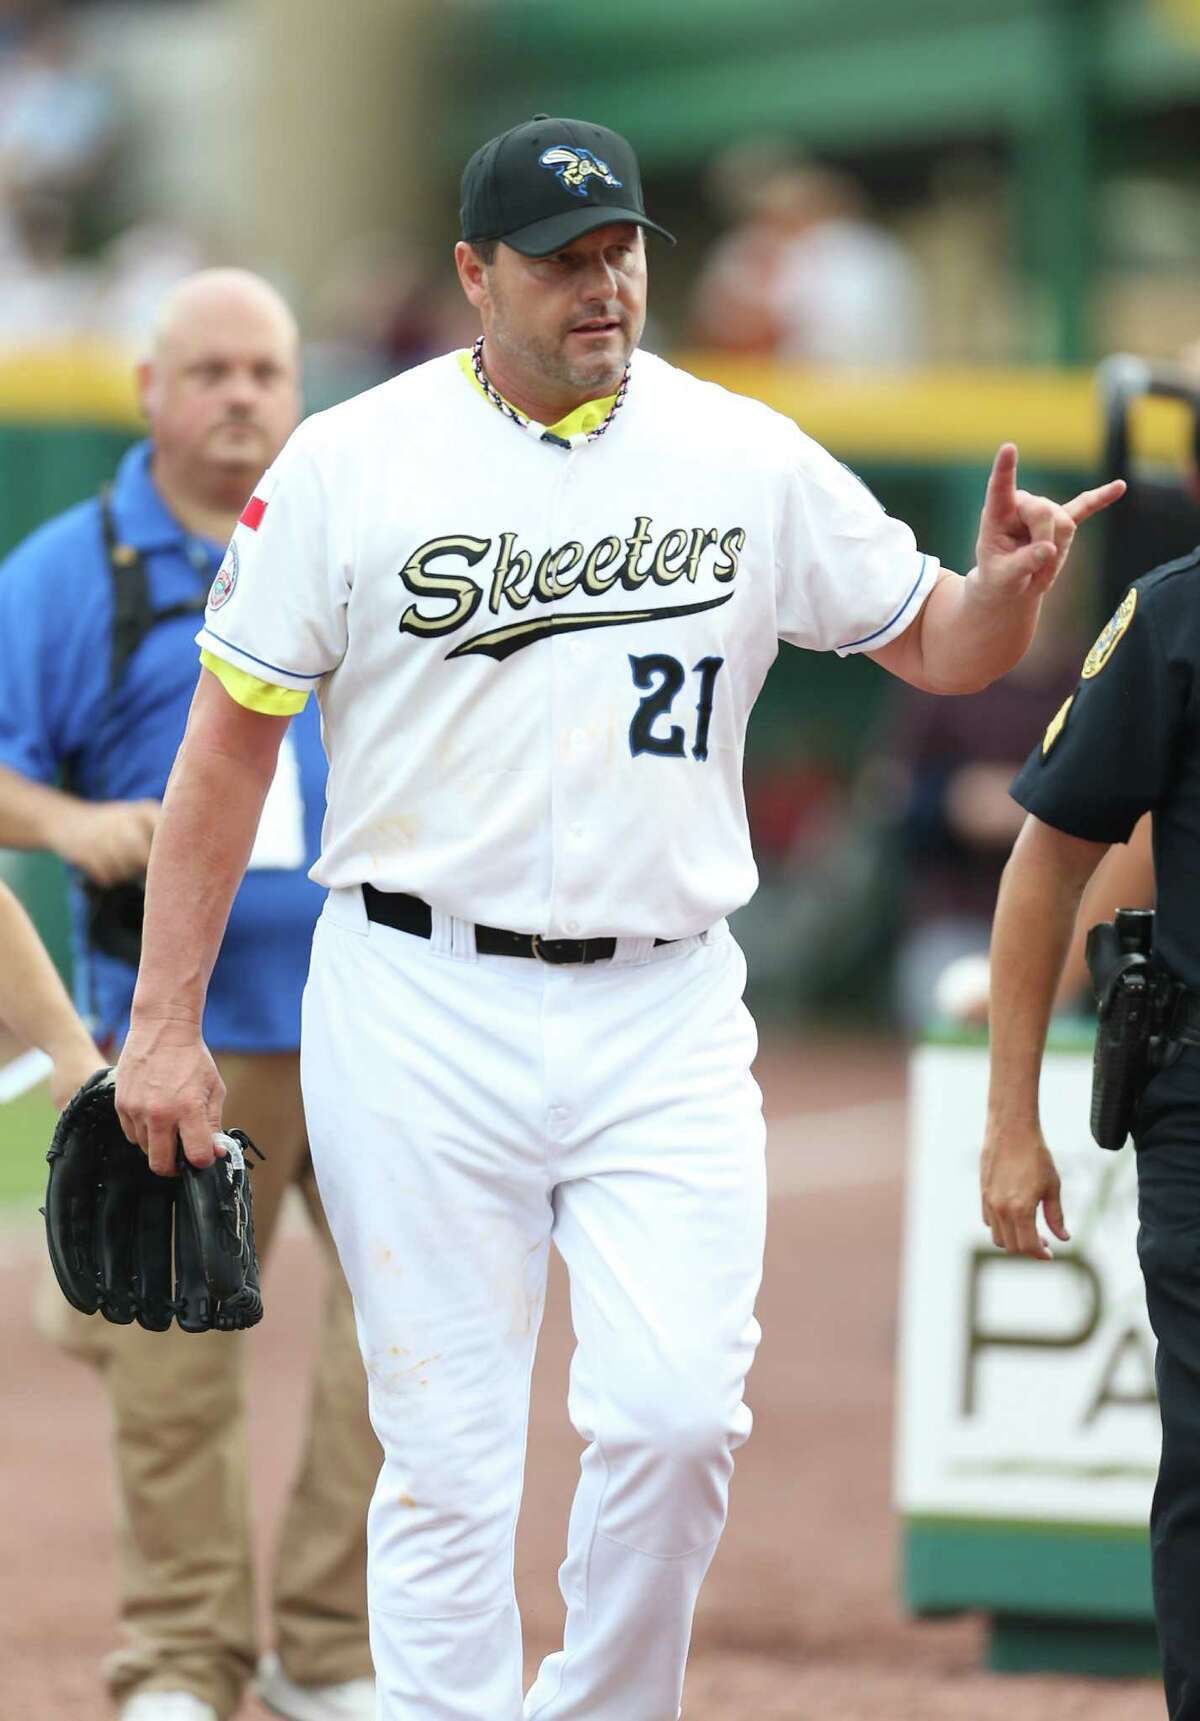 Roger Clemens walks to the dugout before the start of the Sugar Land Skeeters baseball game against Bridgeport at Constellation Field, Sunday, Aug. 26, 2012, in Sugar Land, where Roger Clemens was set to take the mound.